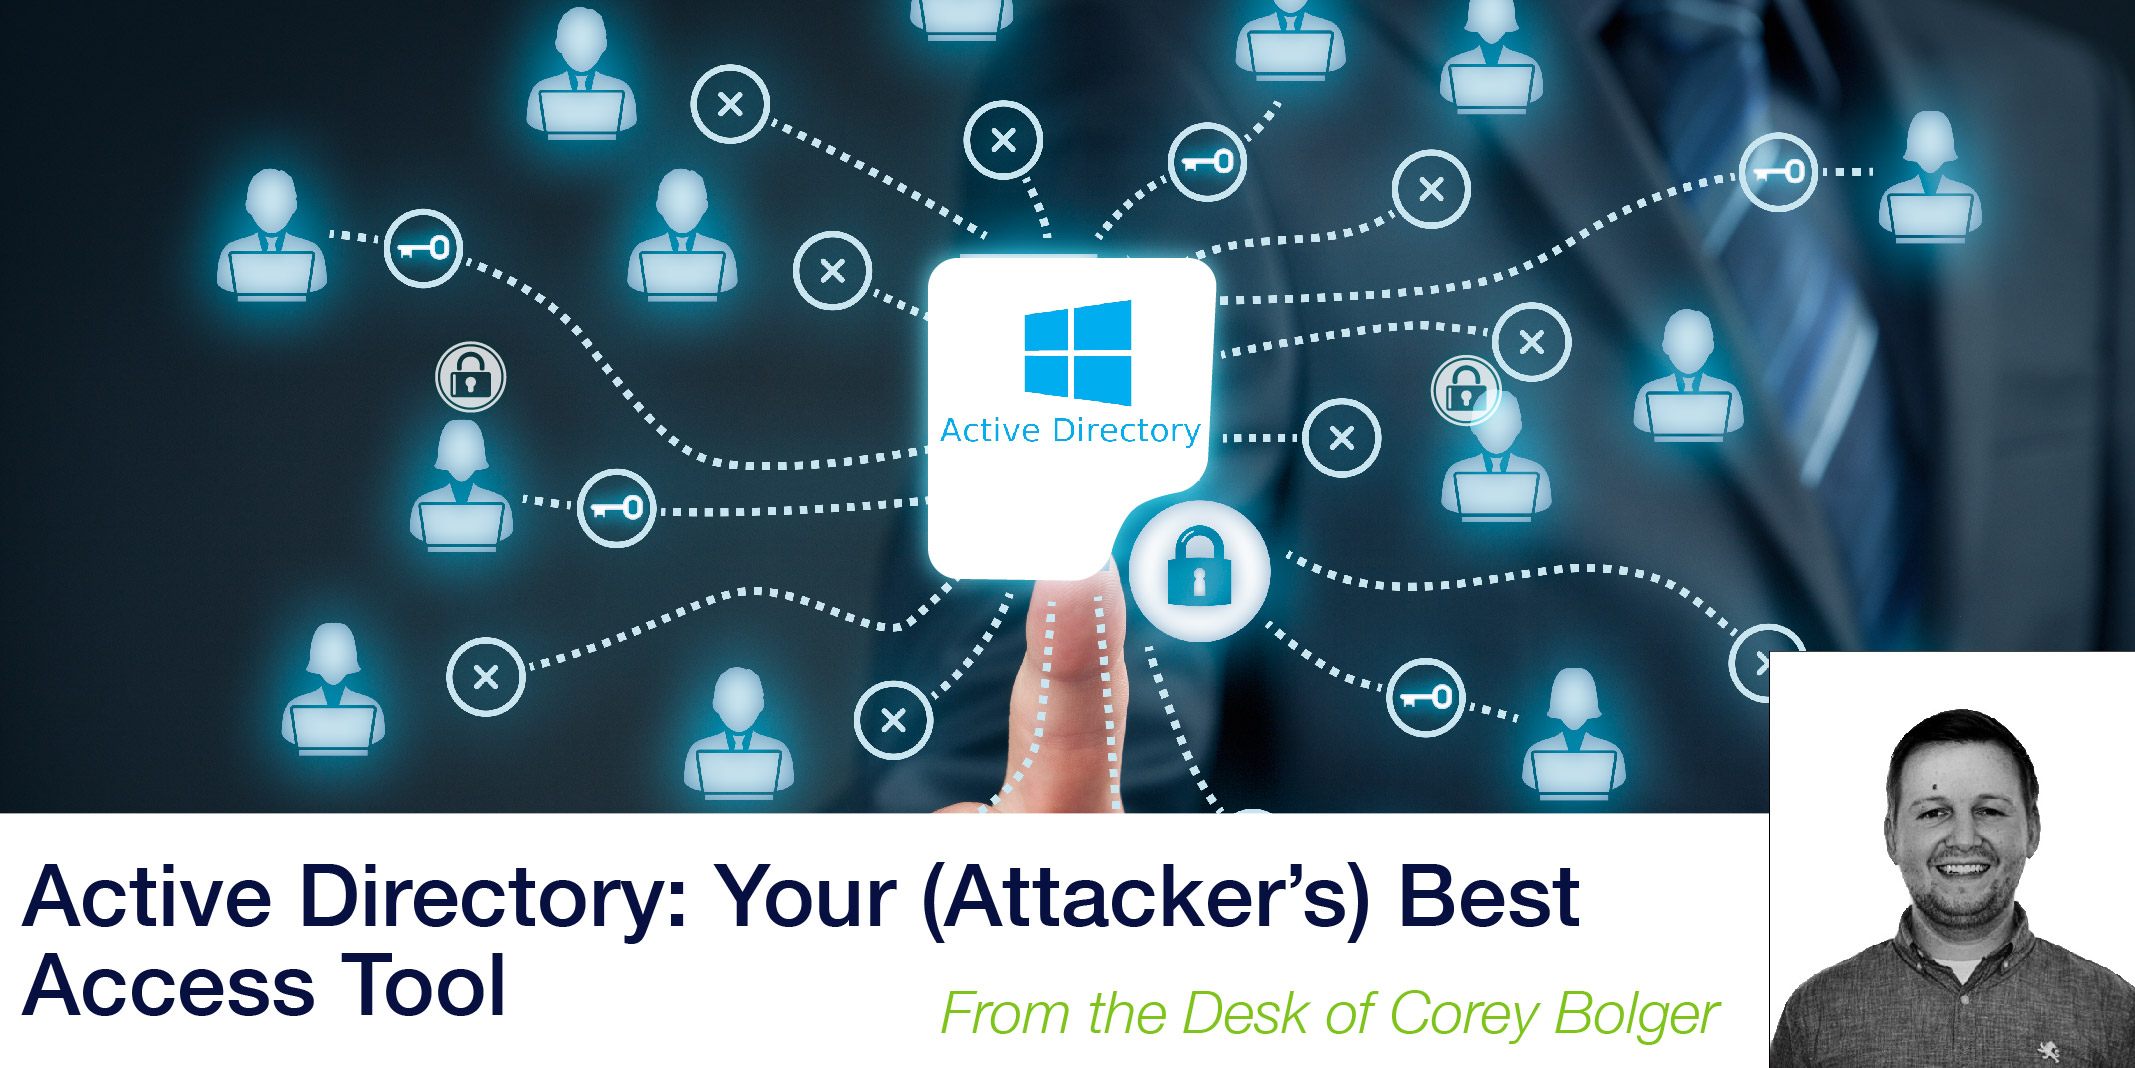 Active Directory: Your (Attacker’s) Best Access Tool